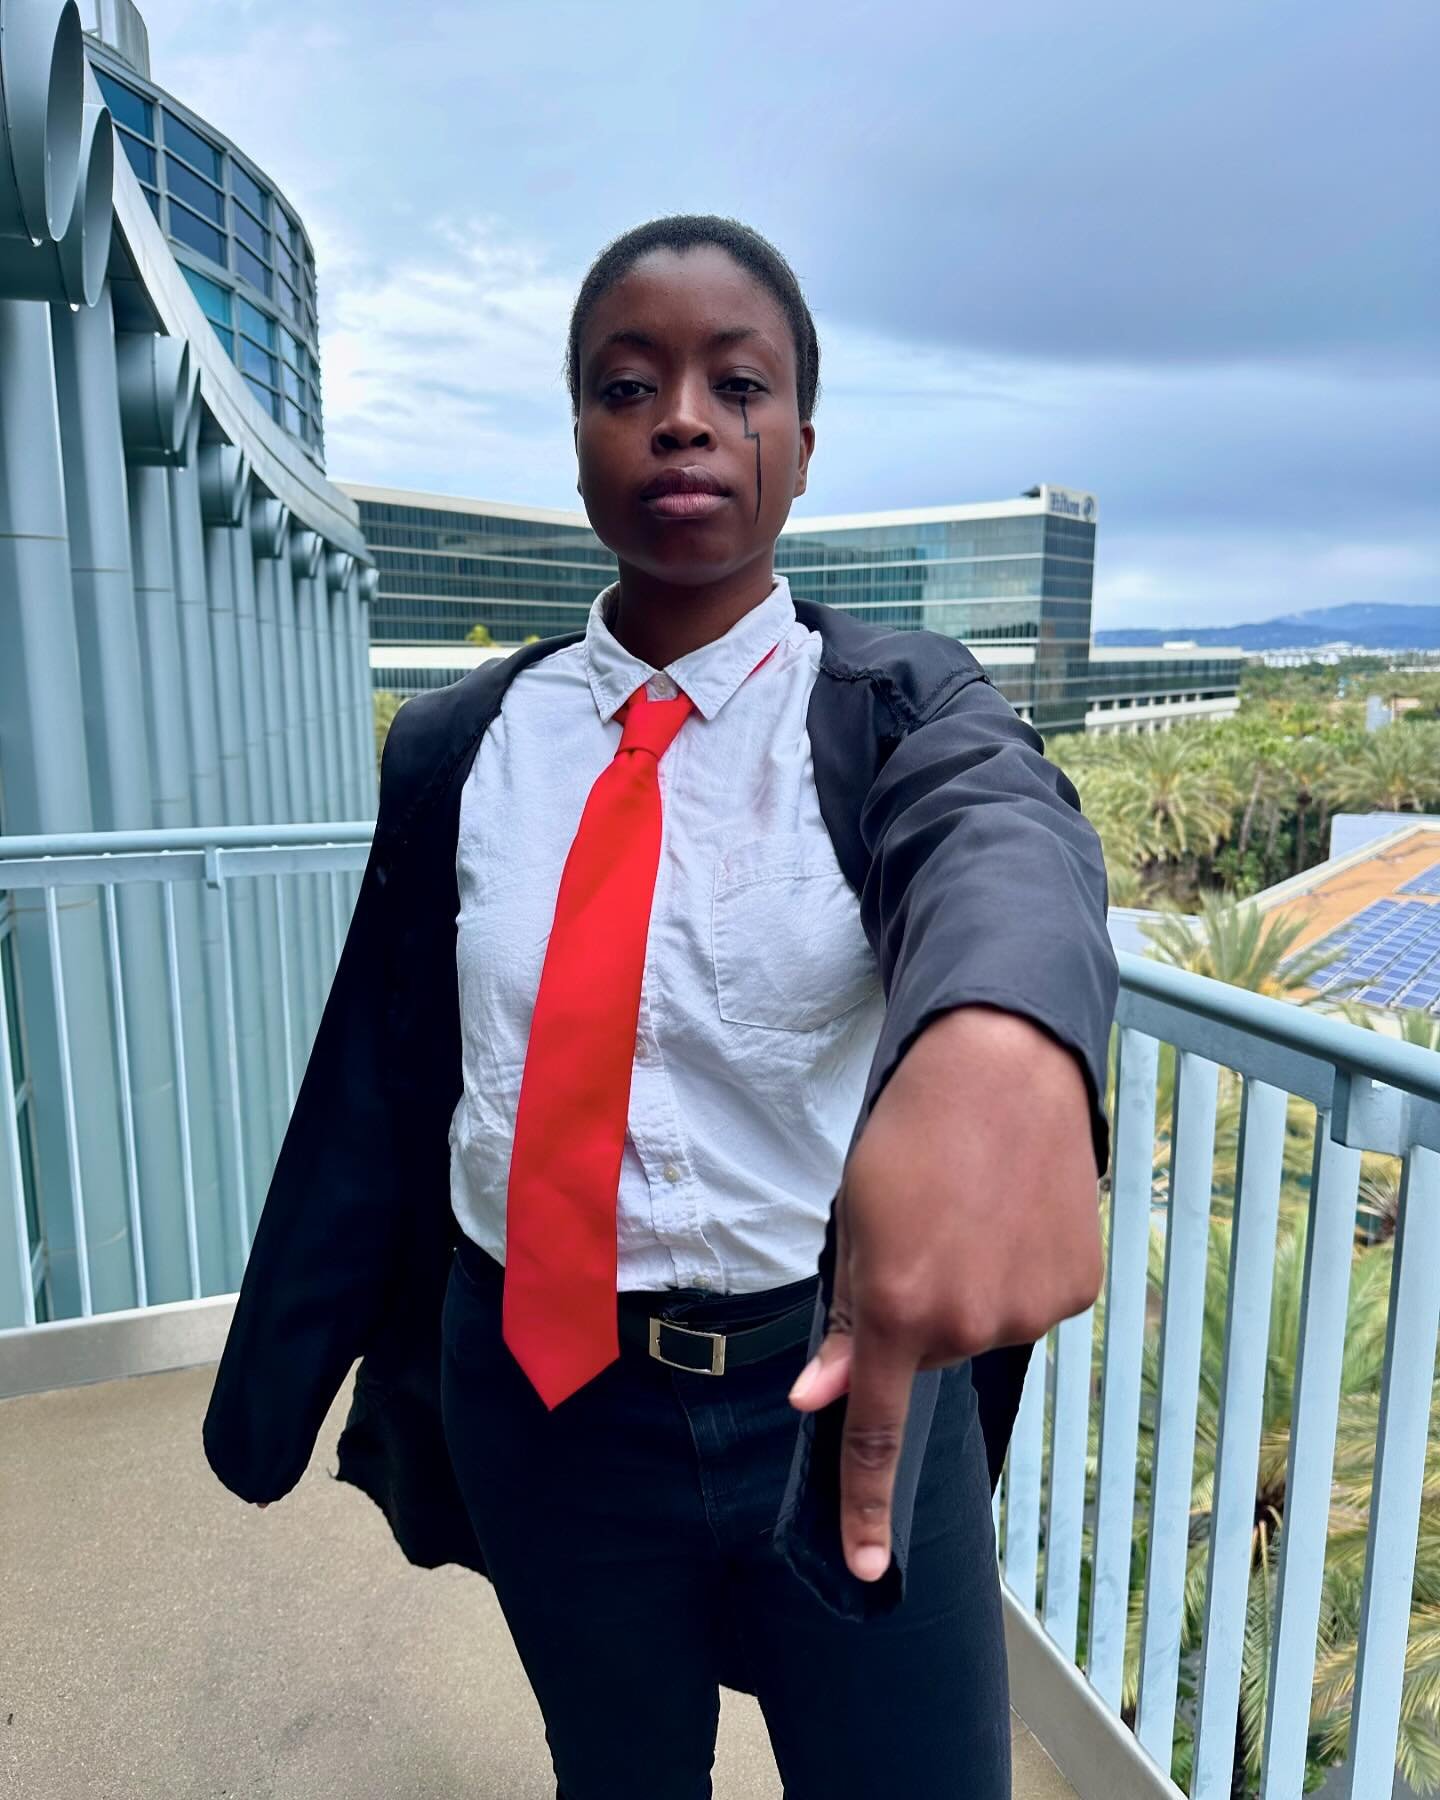 &ldquo;I&rsquo;ve got no choice but to crush it&hellip; with my fist&rdquo; 👊🏿 

Had a great time cosplaying Mashle at WonderCon 2024 (even in the rain), and leveled up my cosplay with his iron wand! Shoutout to @ephemeralkomorebi for these epic ph